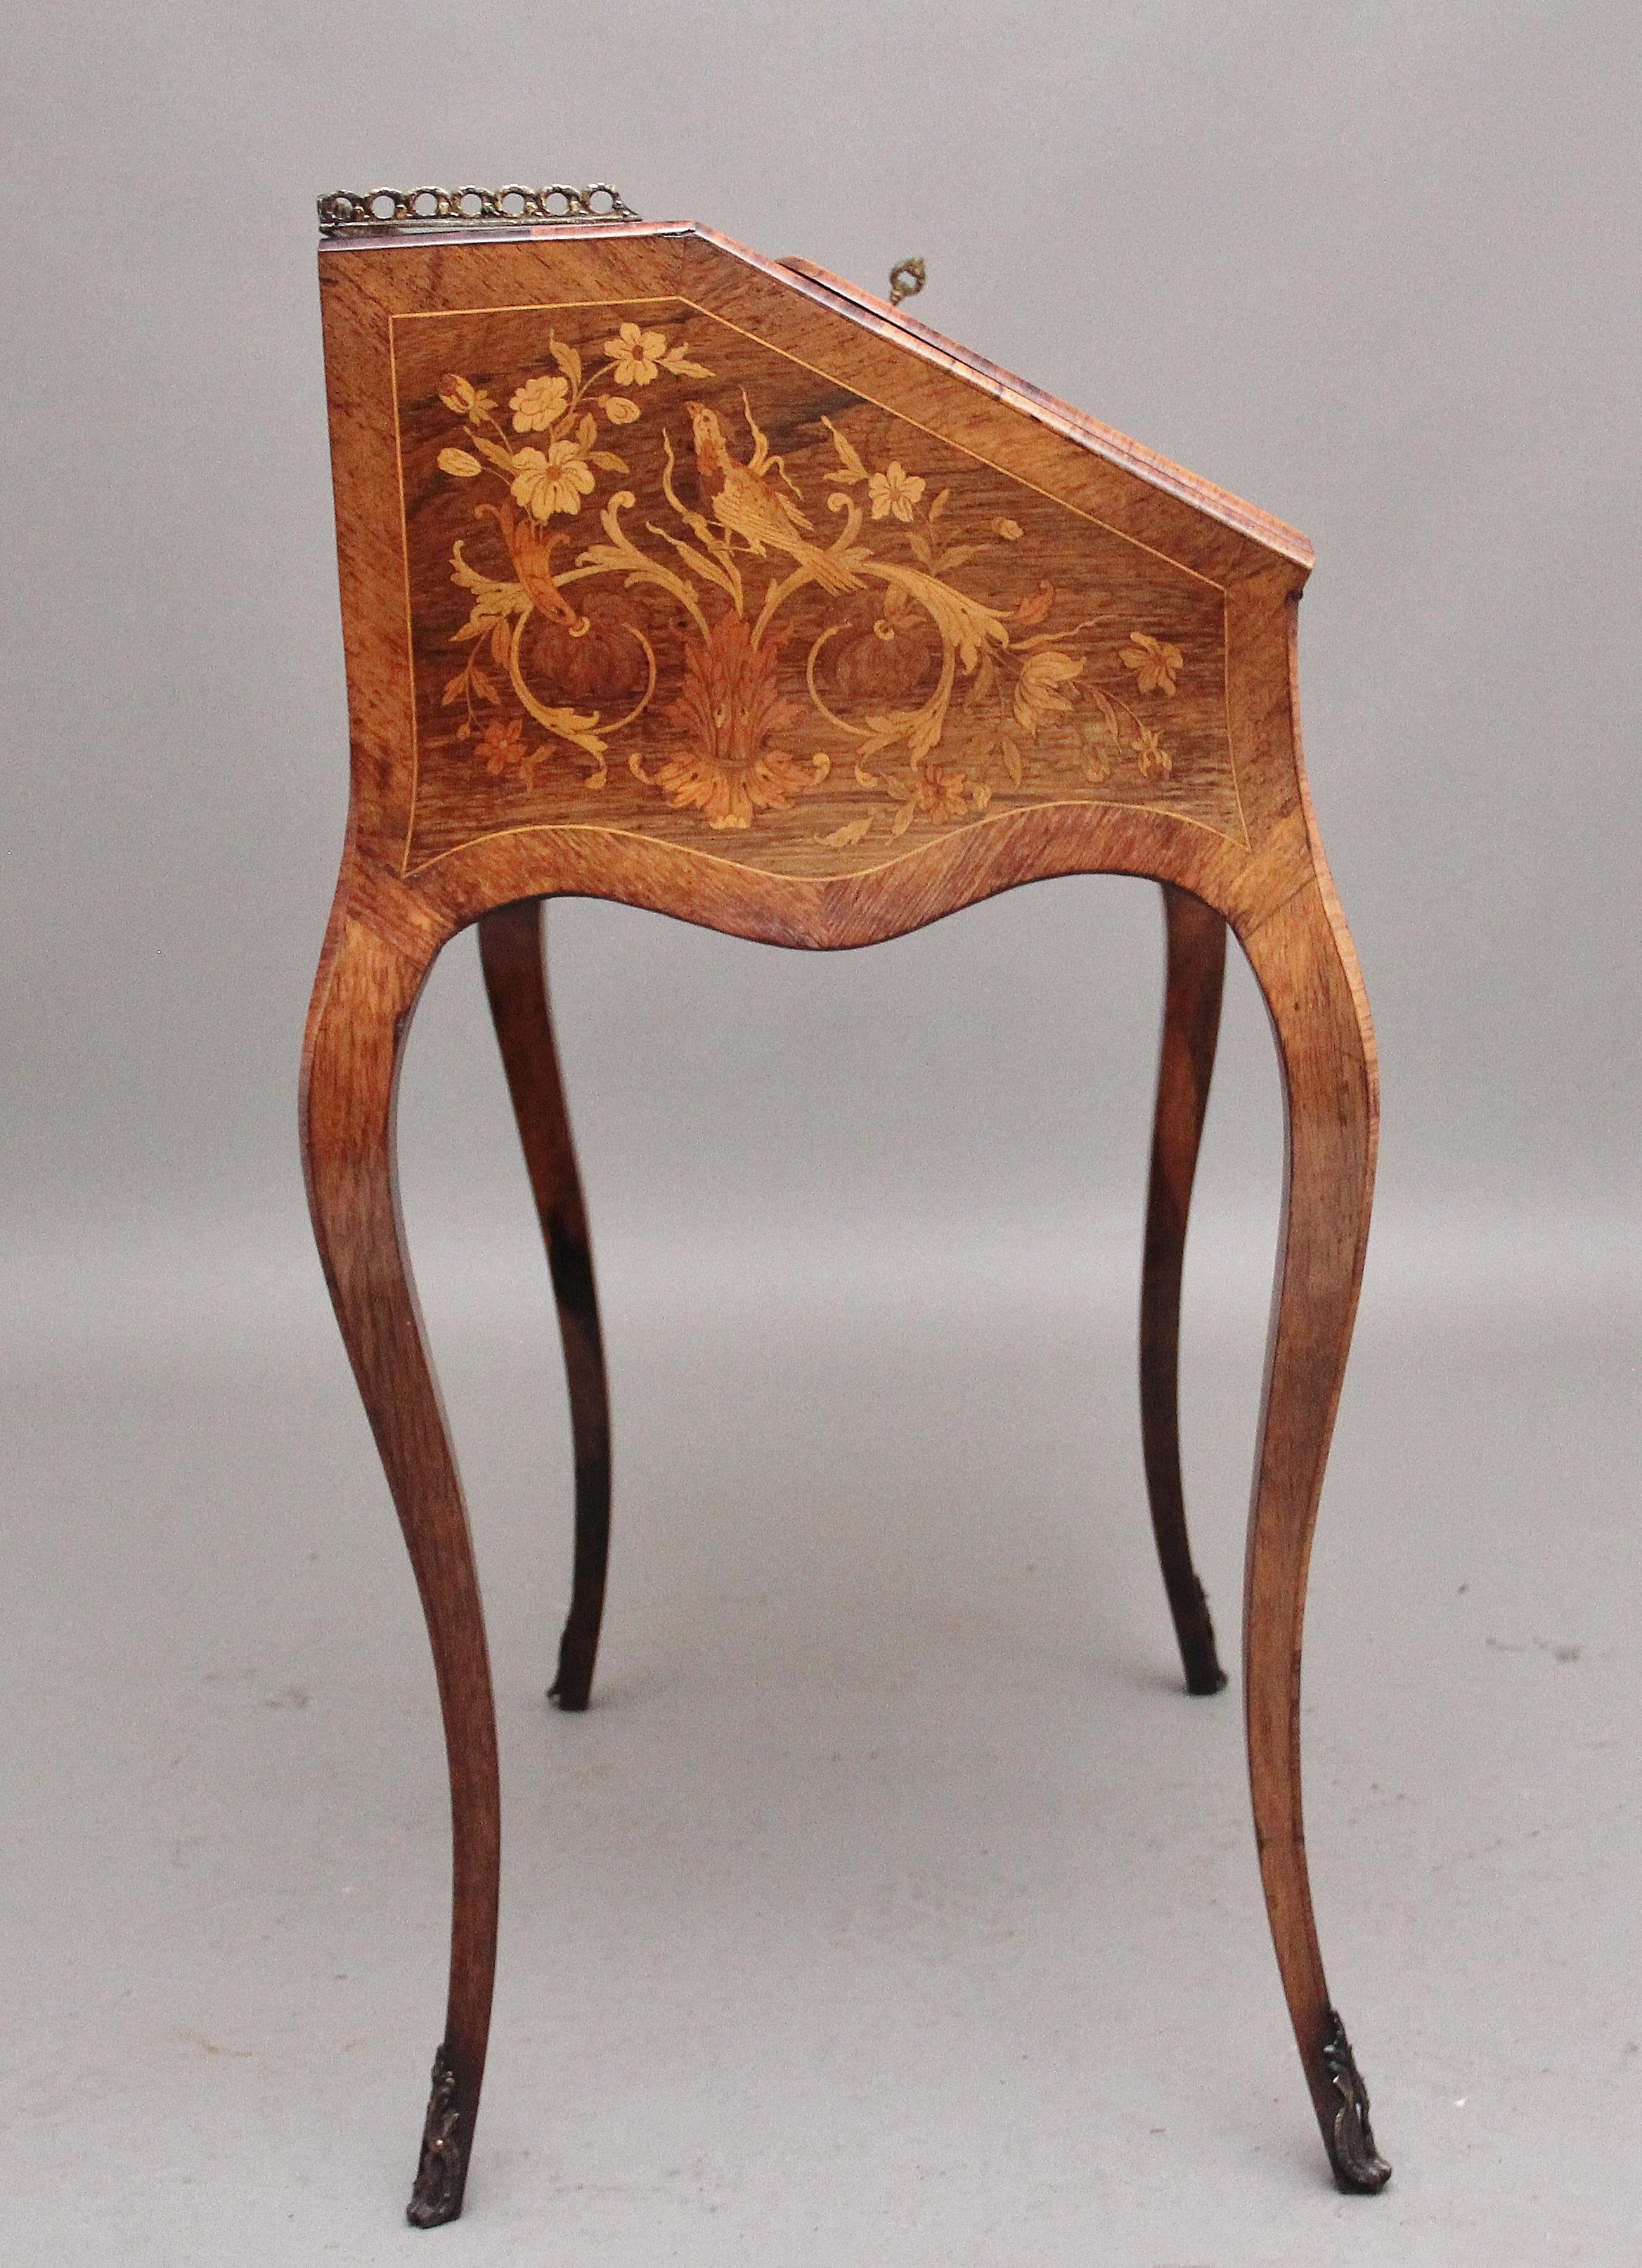 Superb Quality Freestanding 19th Century Kingwood and Marquetry Inlaid Bureau For Sale 6